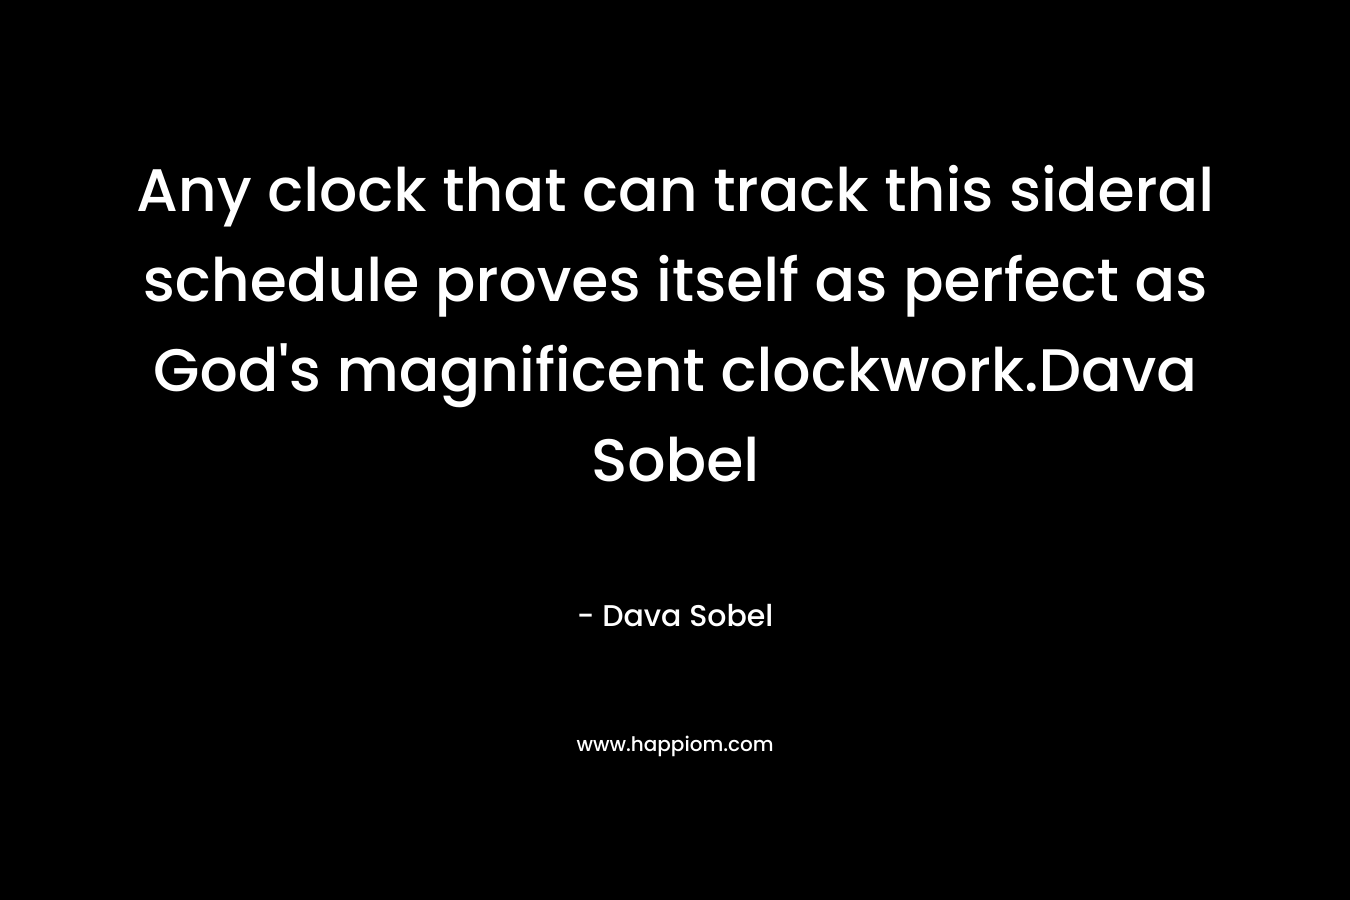 Any clock that can track this sideral schedule proves itself as perfect as God's magnificent clockwork.Dava Sobel